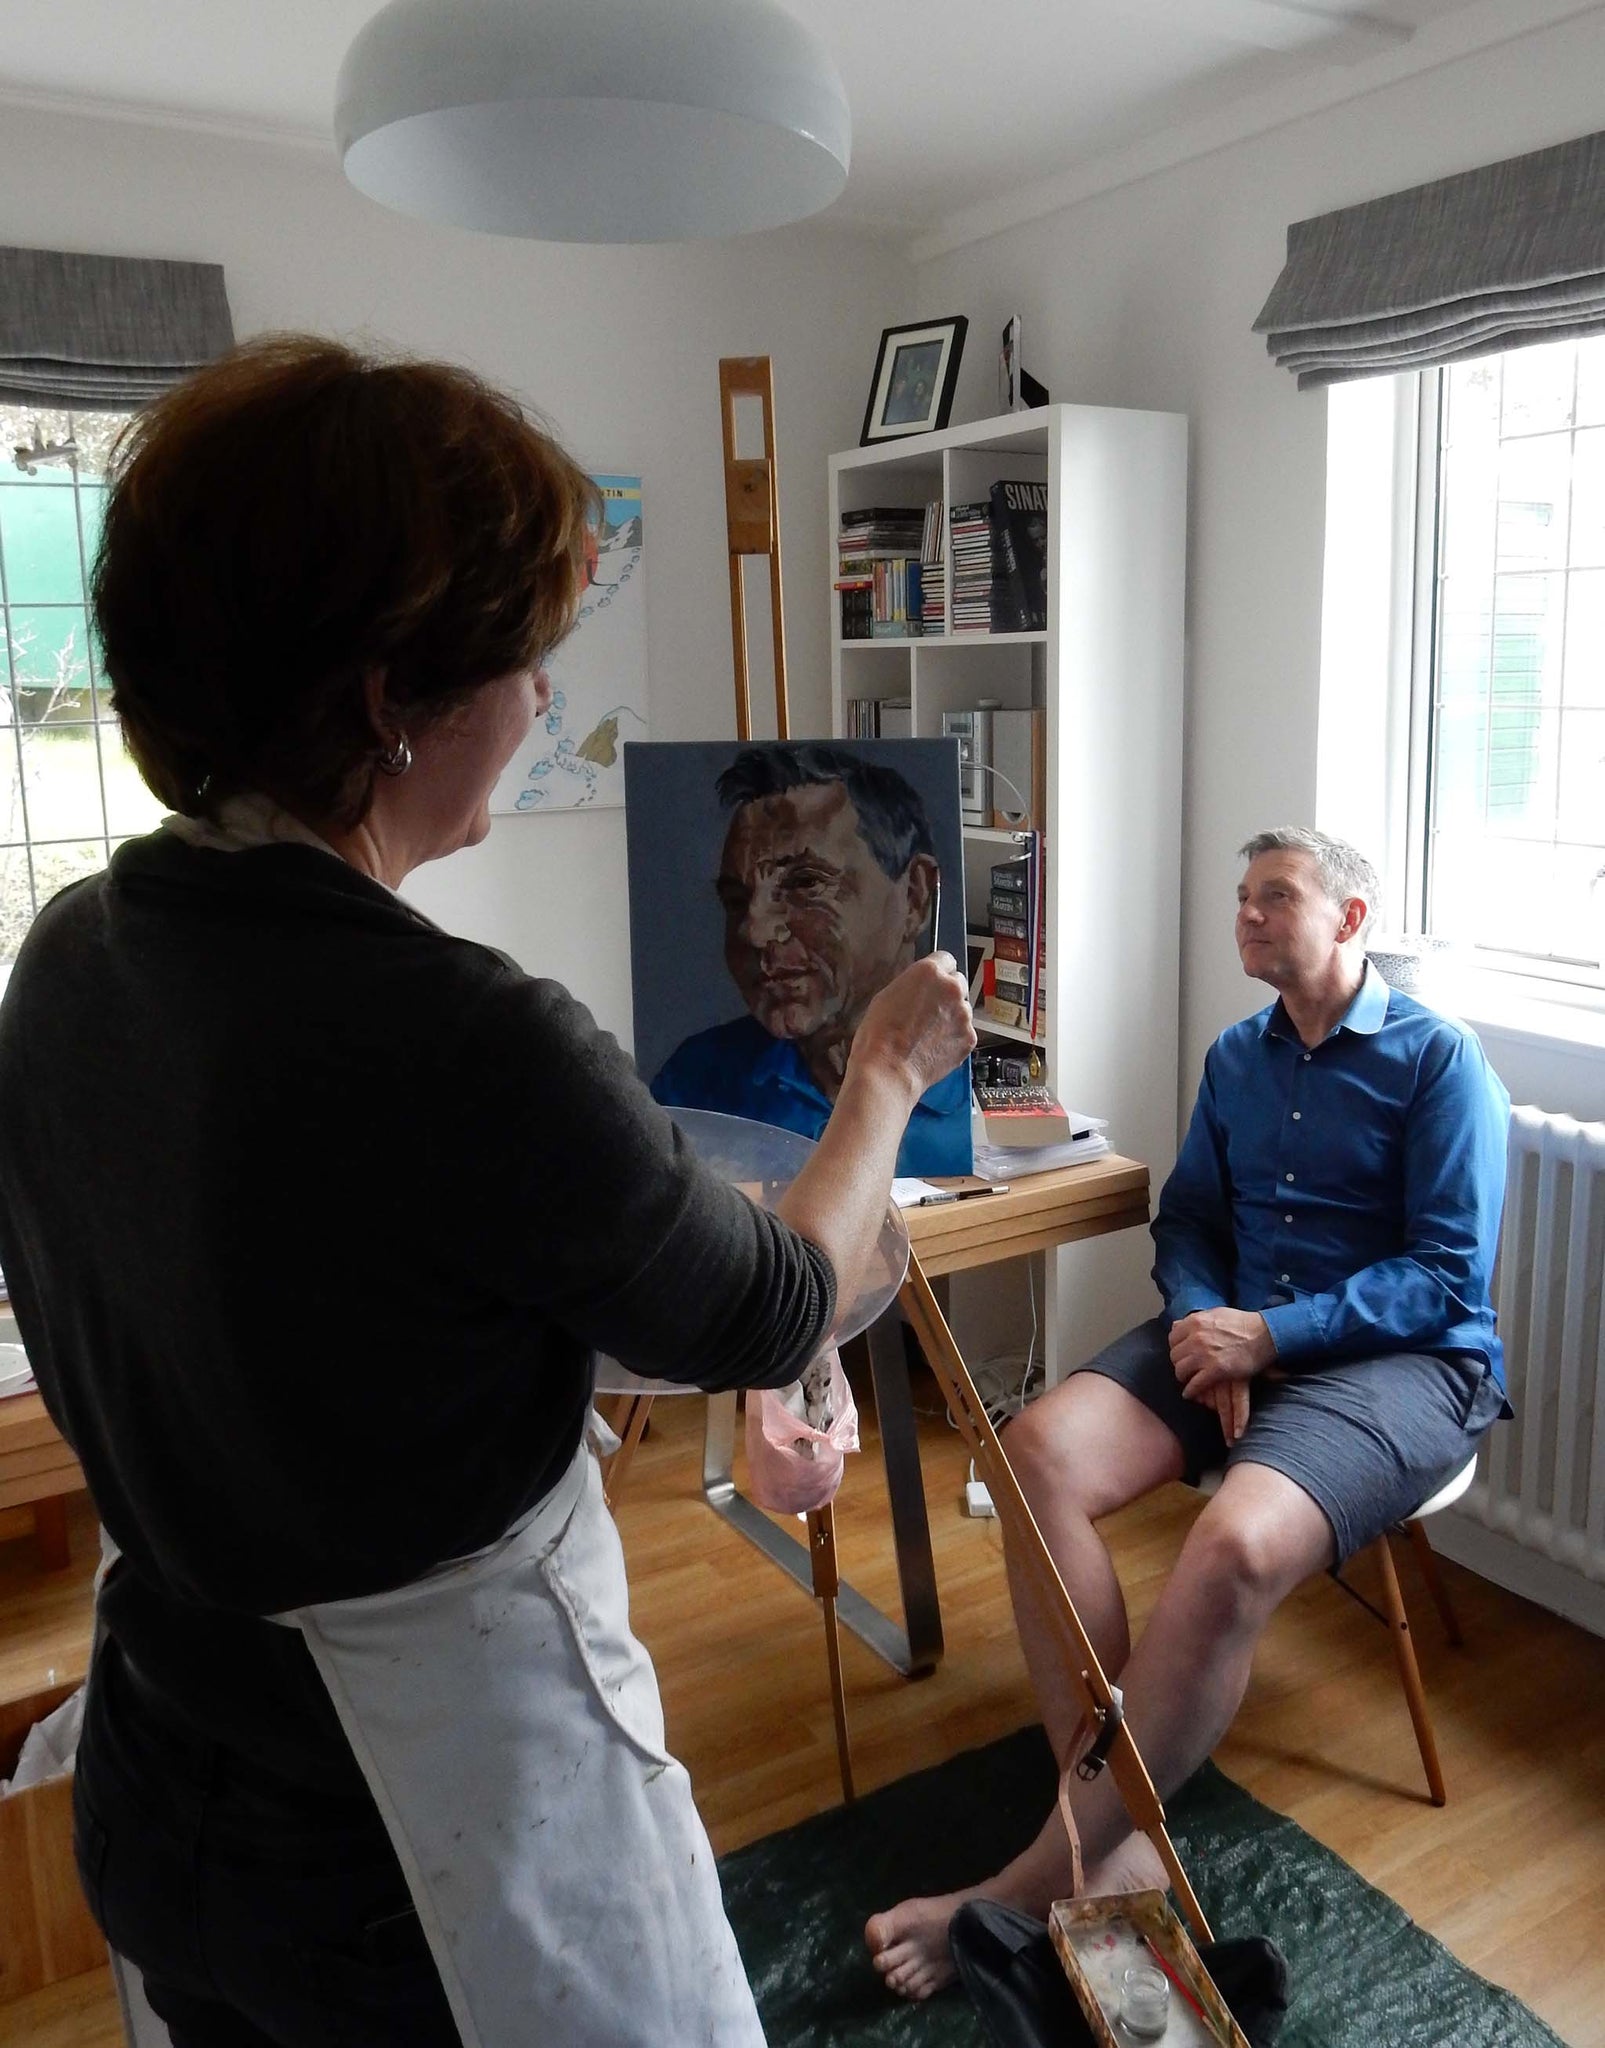 Stella Tooth painting a commissioned portrait of Martin Le Jeune in oils at his home.